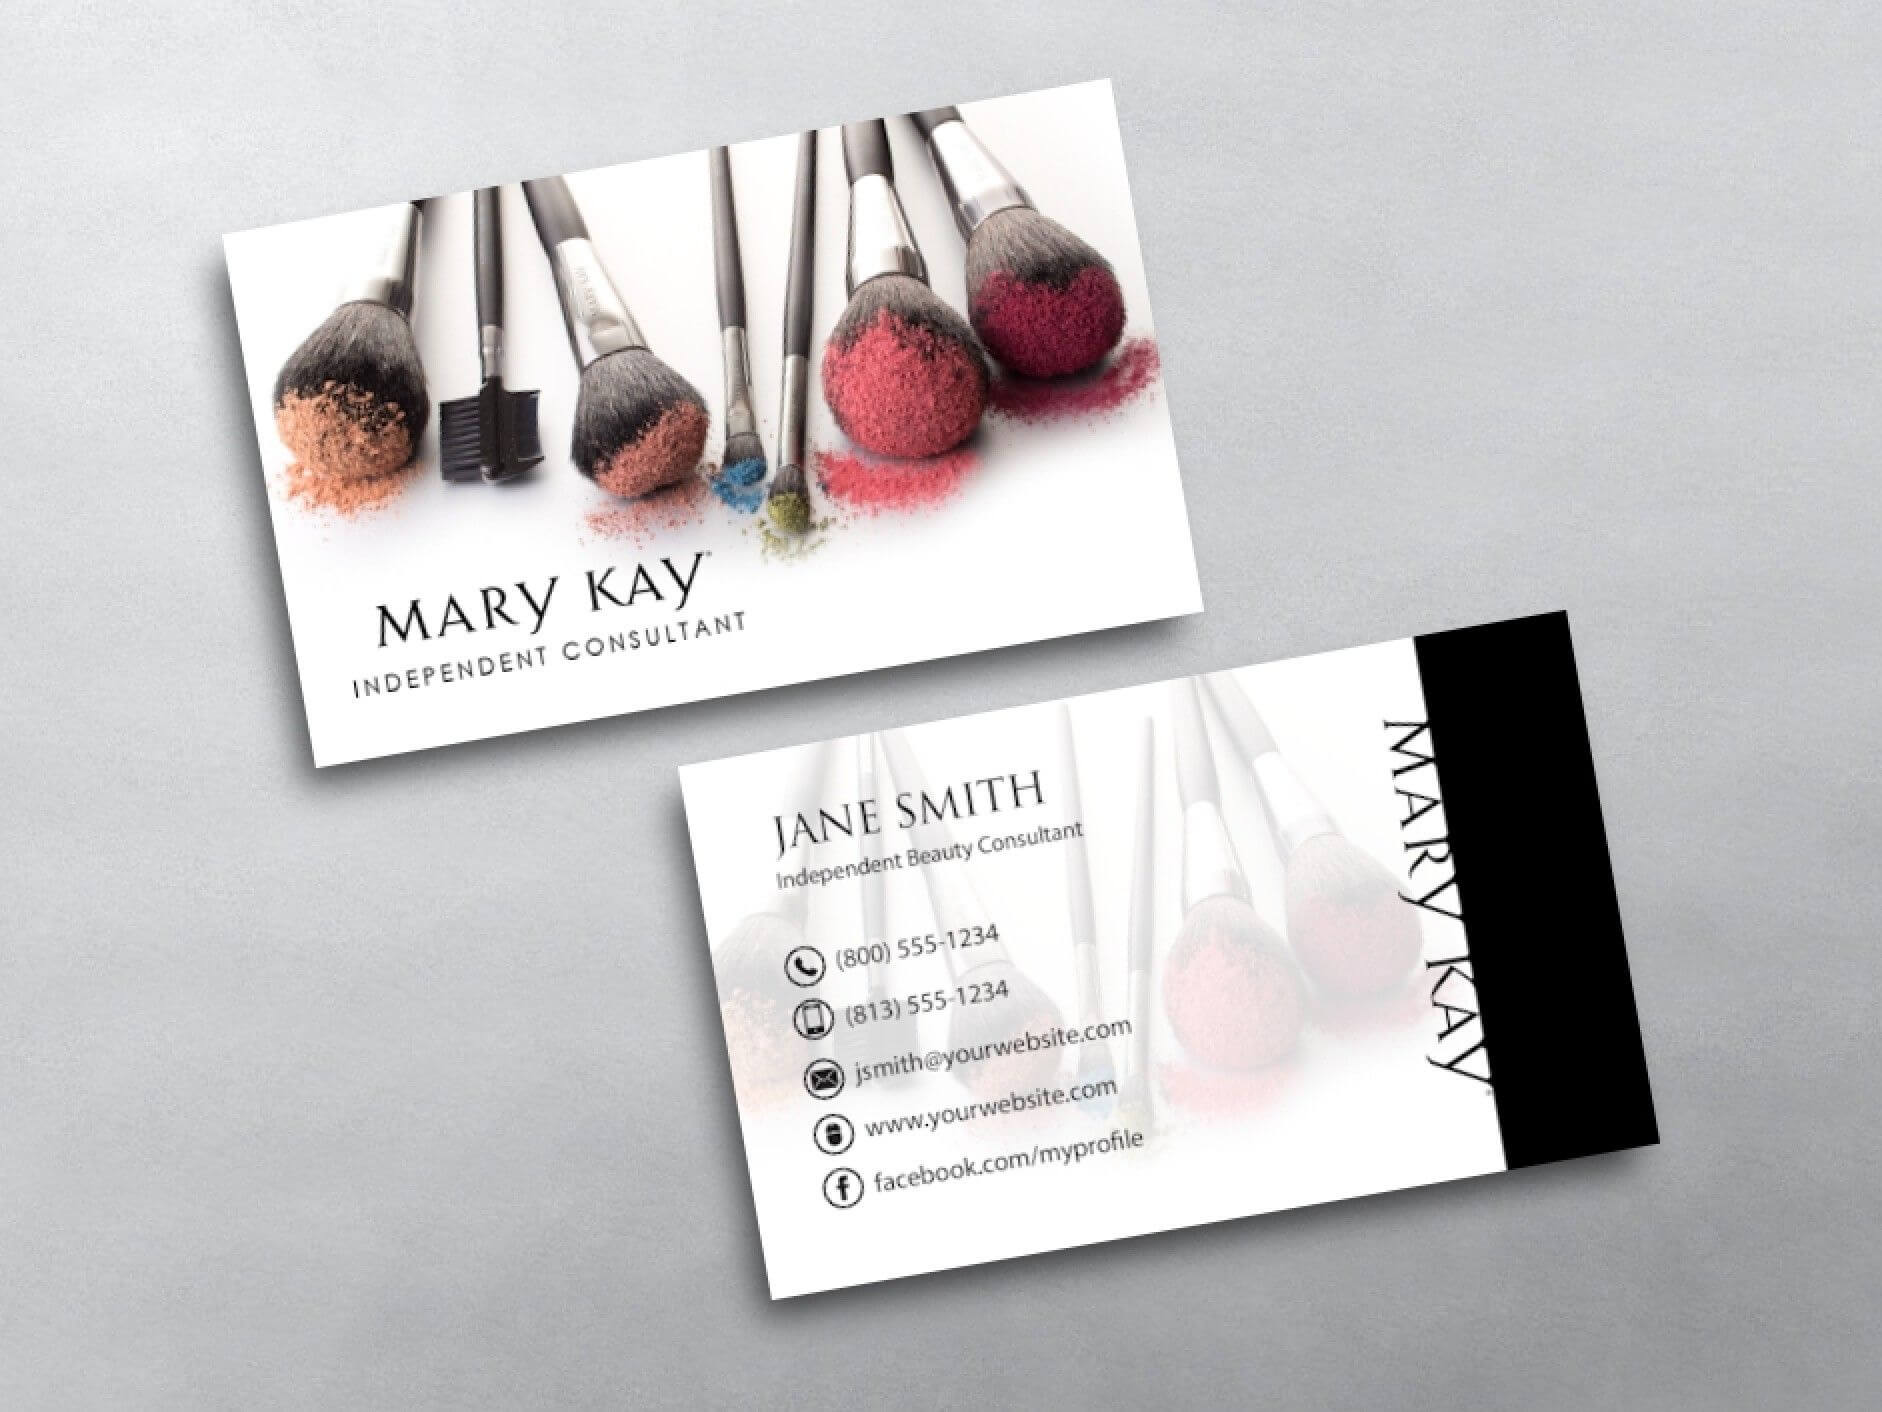 Mary Kay Business Cards In 2019 | Mary Kay, Makeup Artist Throughout Mary Kay Business Cards Templates Free